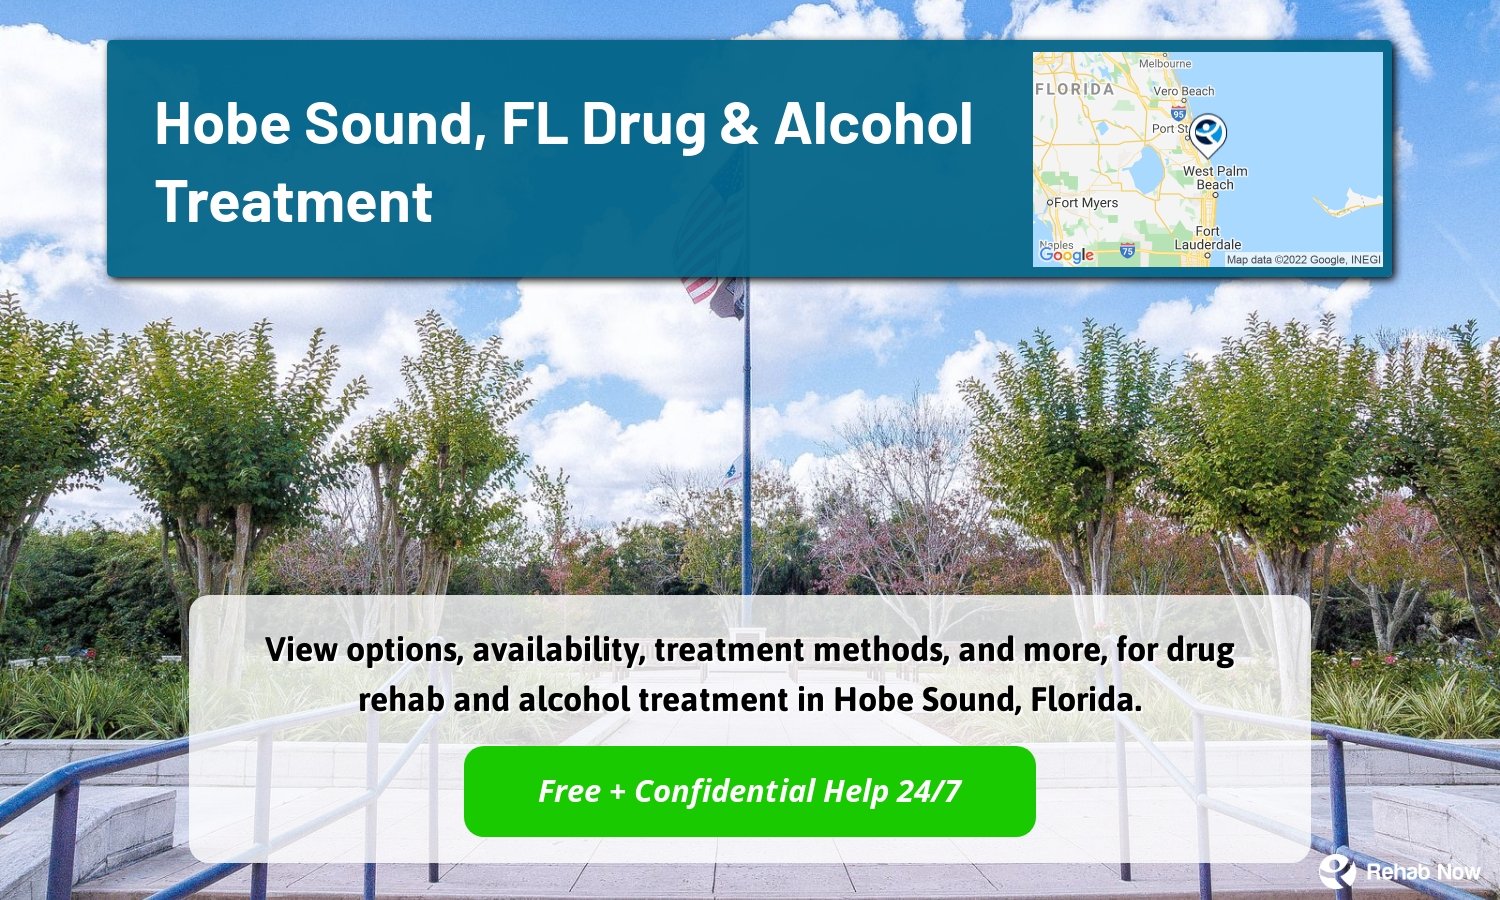 View options, availability, treatment methods, and more, for drug rehab and alcohol treatment in Hobe Sound, Florida.